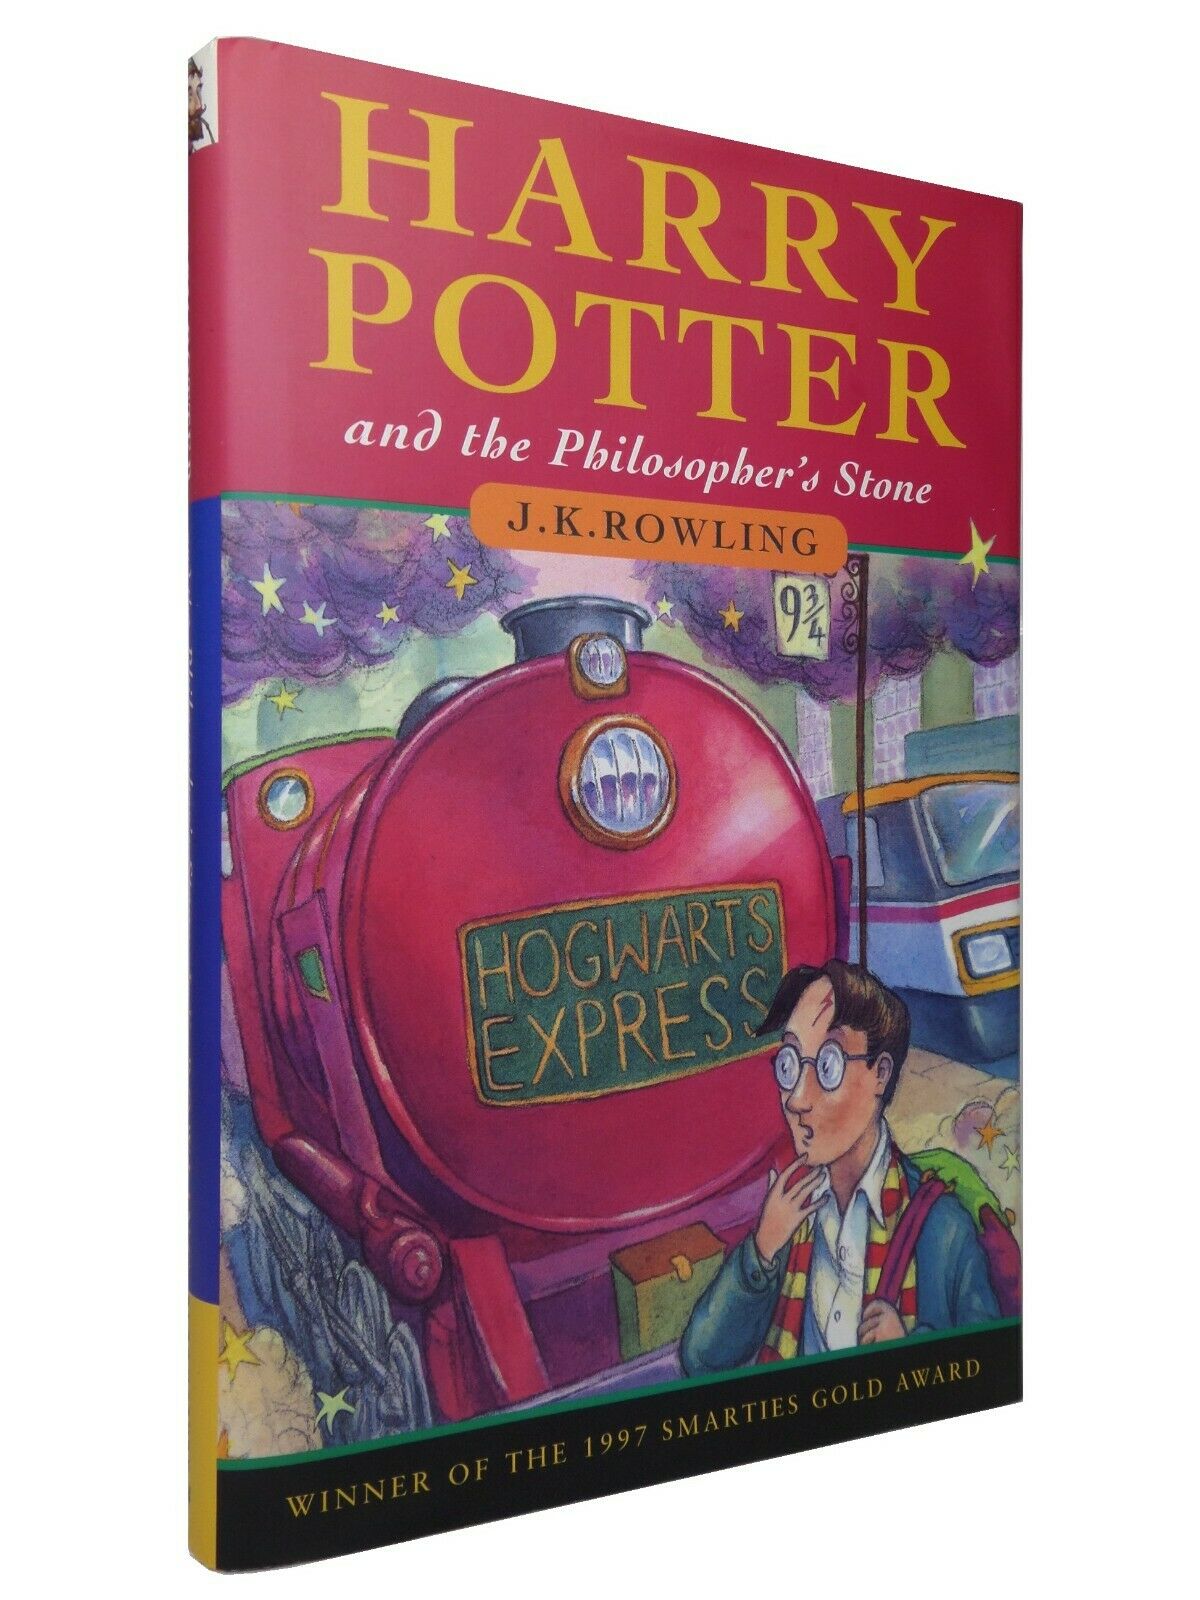 HARRY POTTER AND THE PHILOSOPHER'S STONE 1997 J. K. ROWLING 14TH PRINT HARDBACK